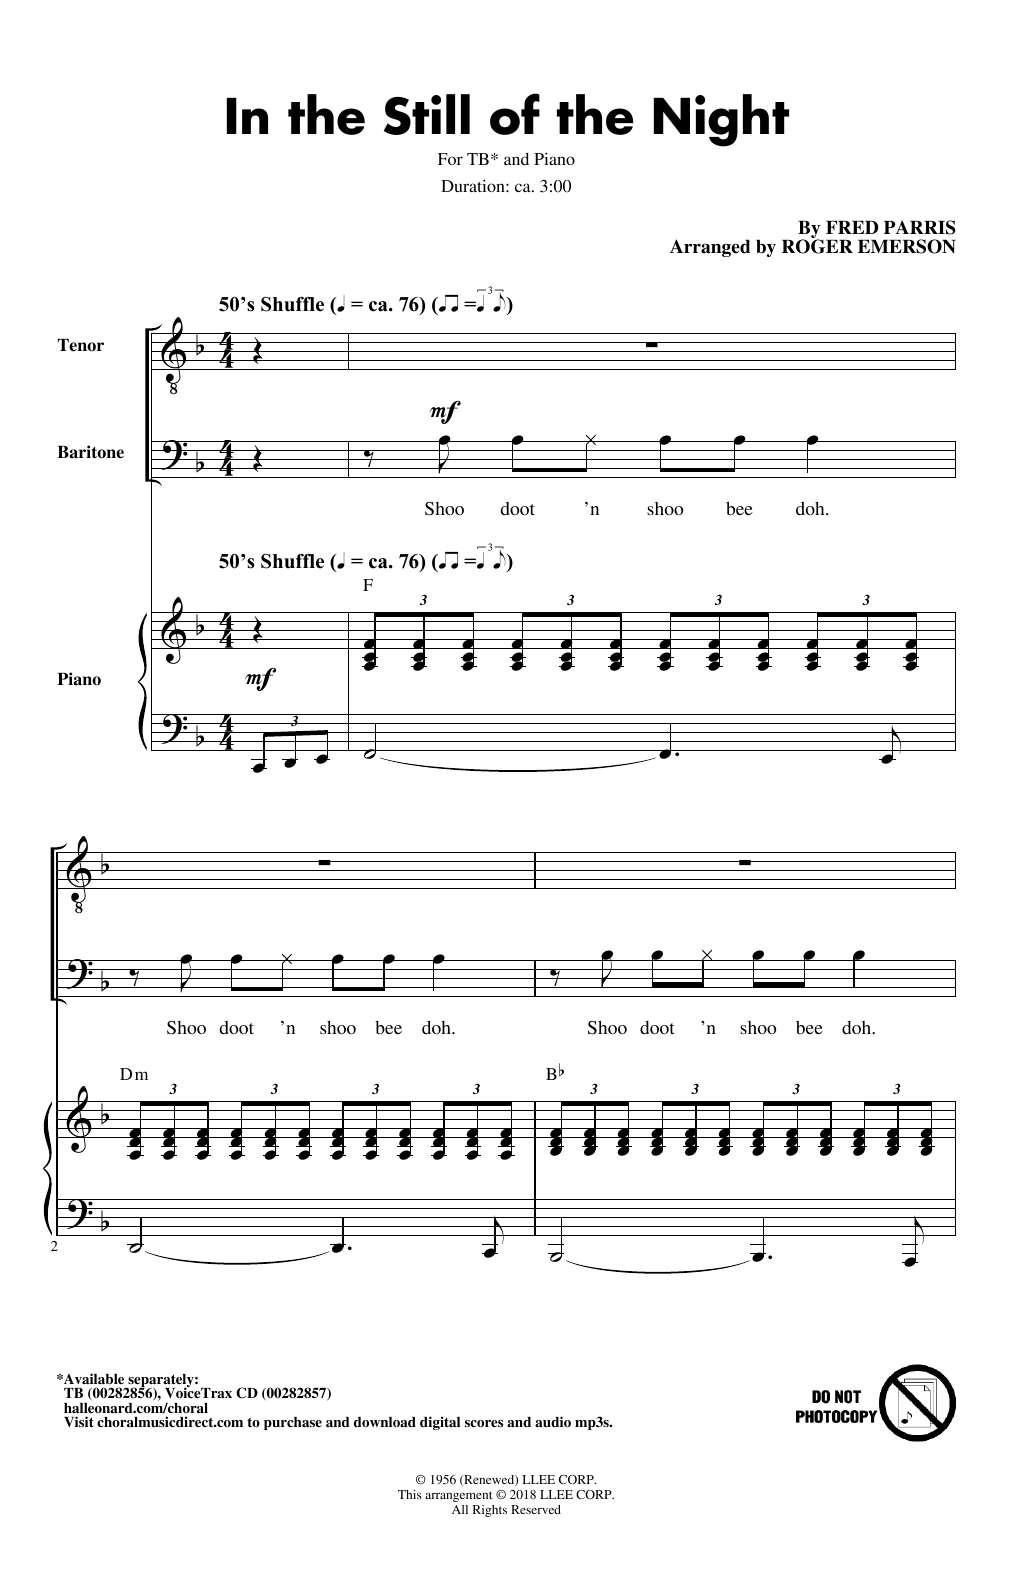 Fred Parris In The Still Of The Night (arr. Roger Emerson) sheet music notes and chords. Download Printable PDF.